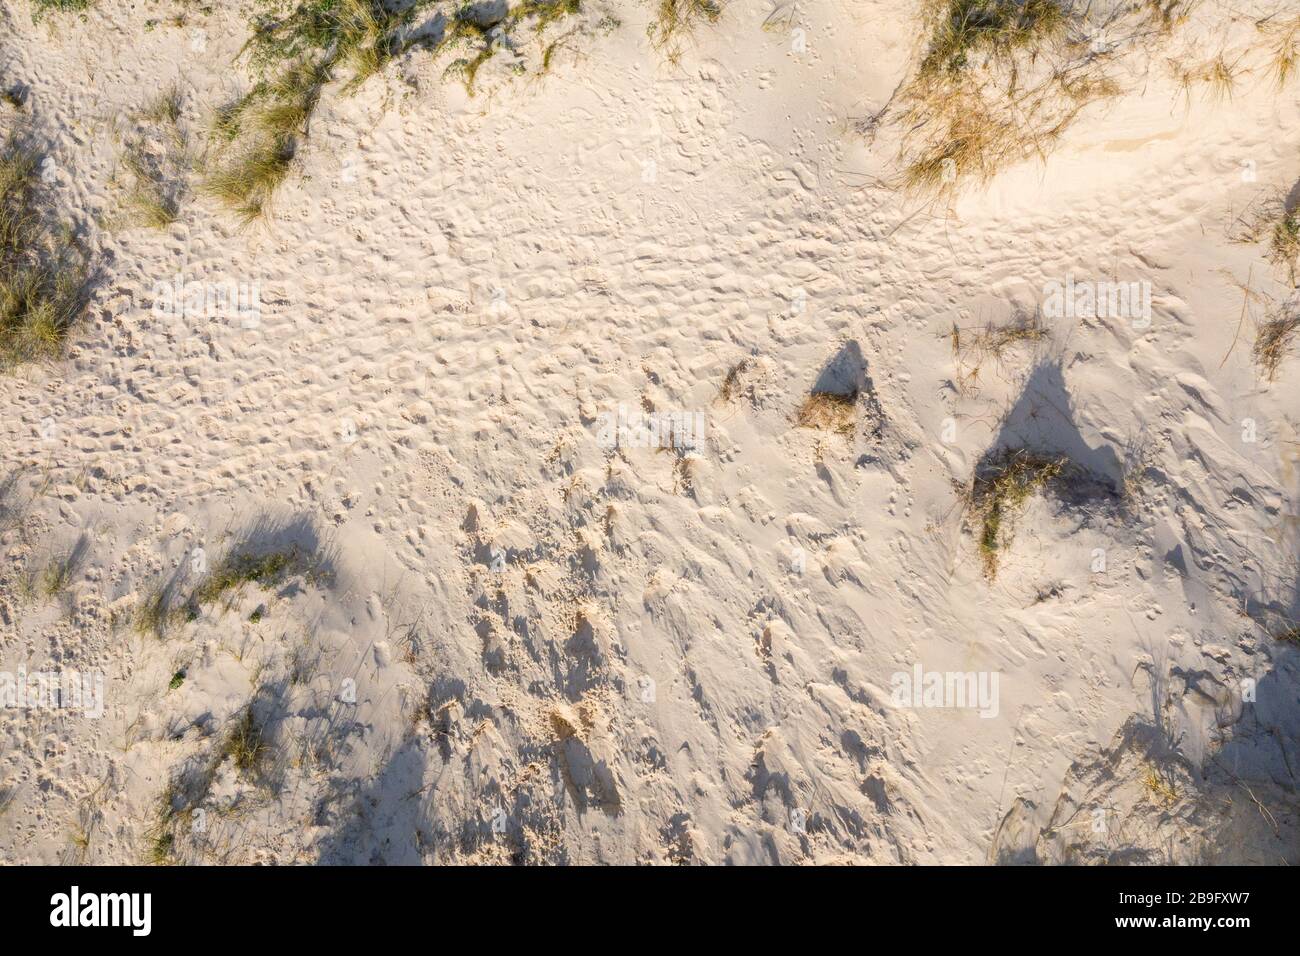 aerial image of footprints in the sand on a sand dune Stock Photo